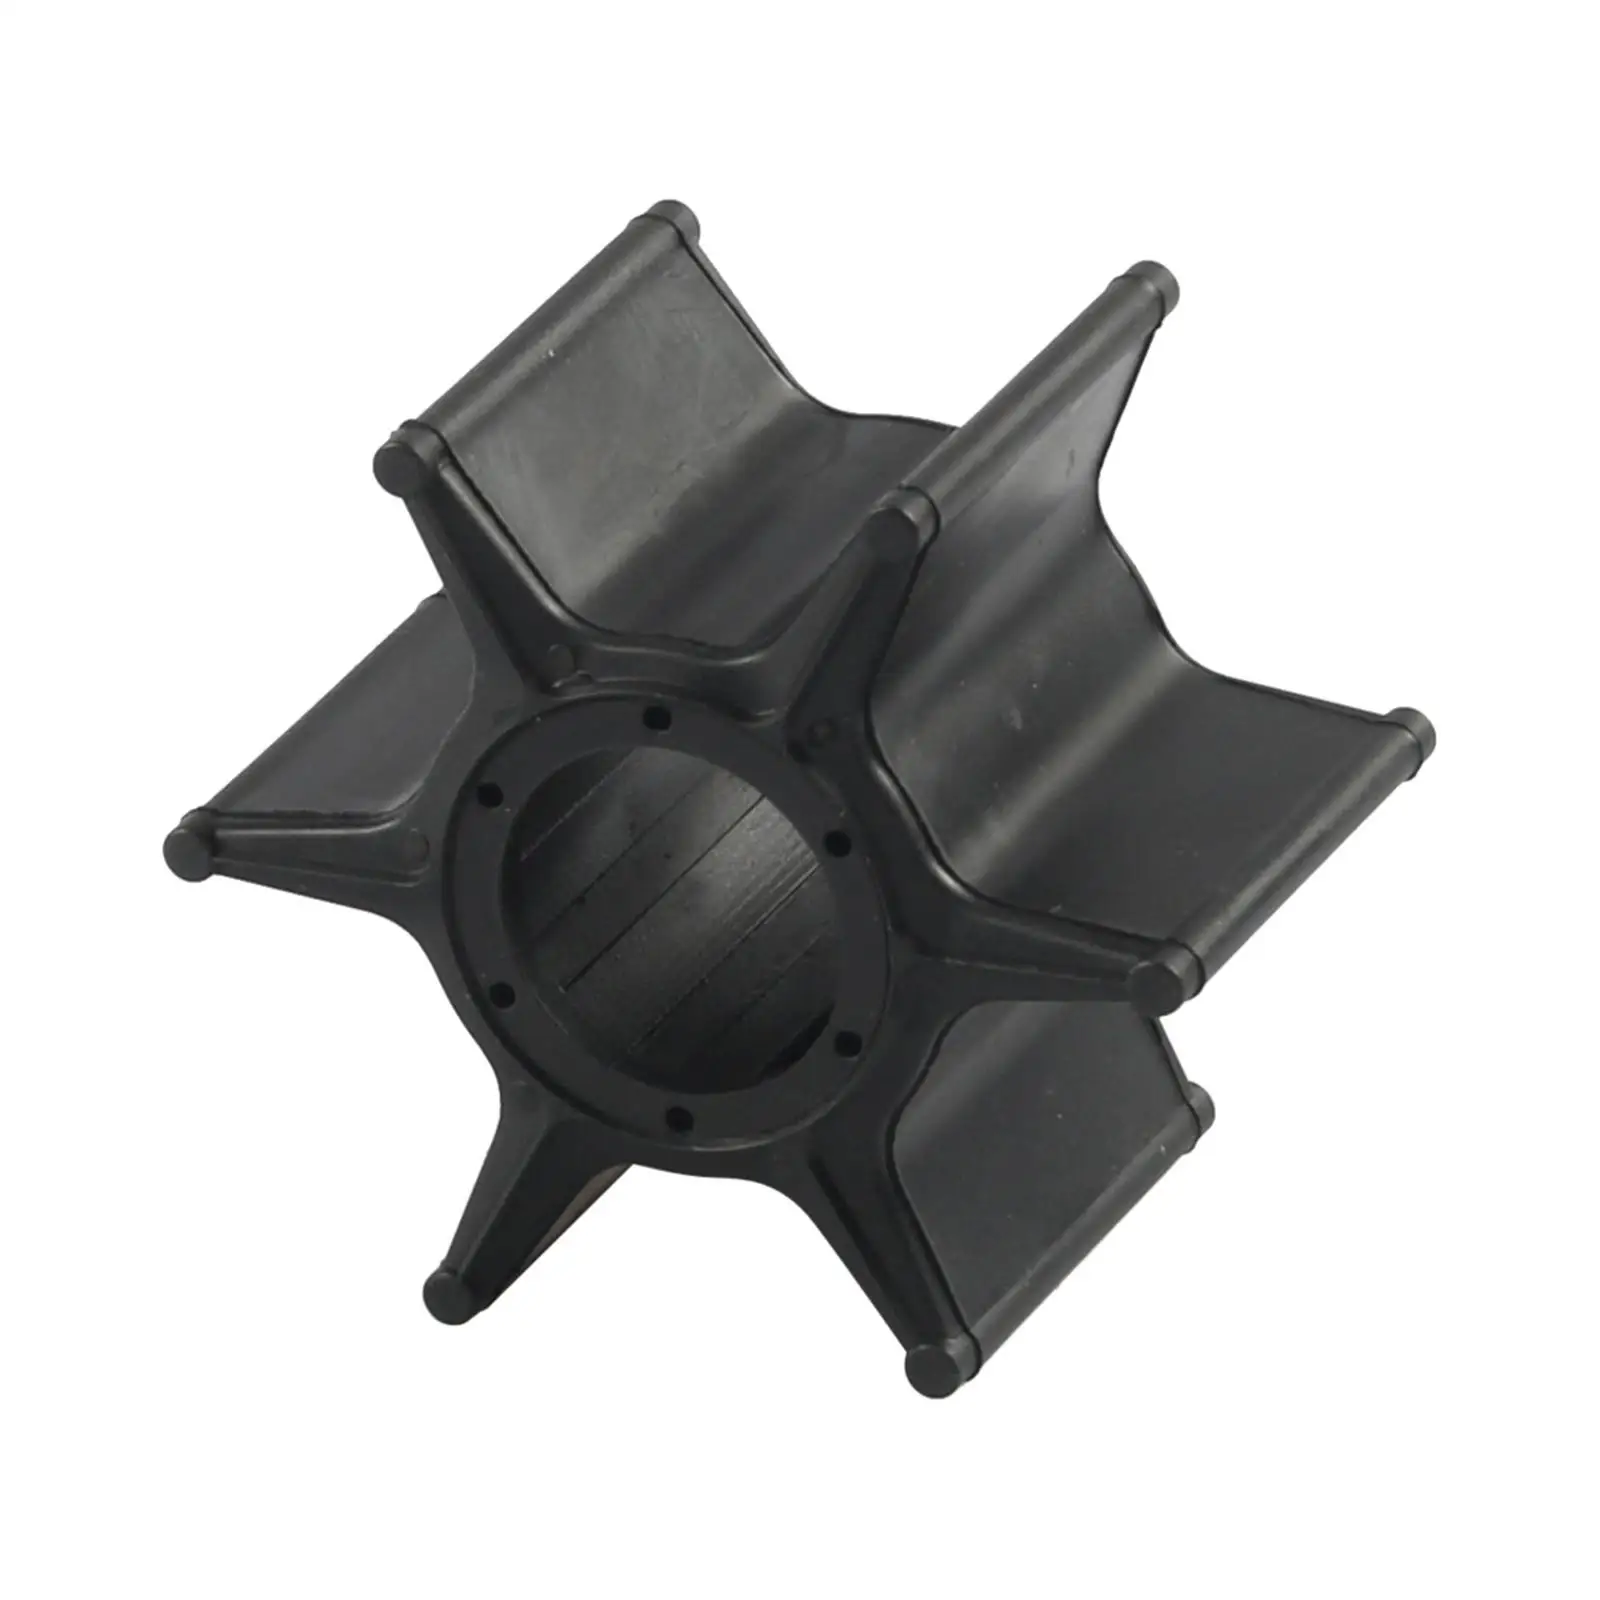 Outboard Water Pump Impeller Replaces 67F-44352-00-00 Professional 67F-44352-00